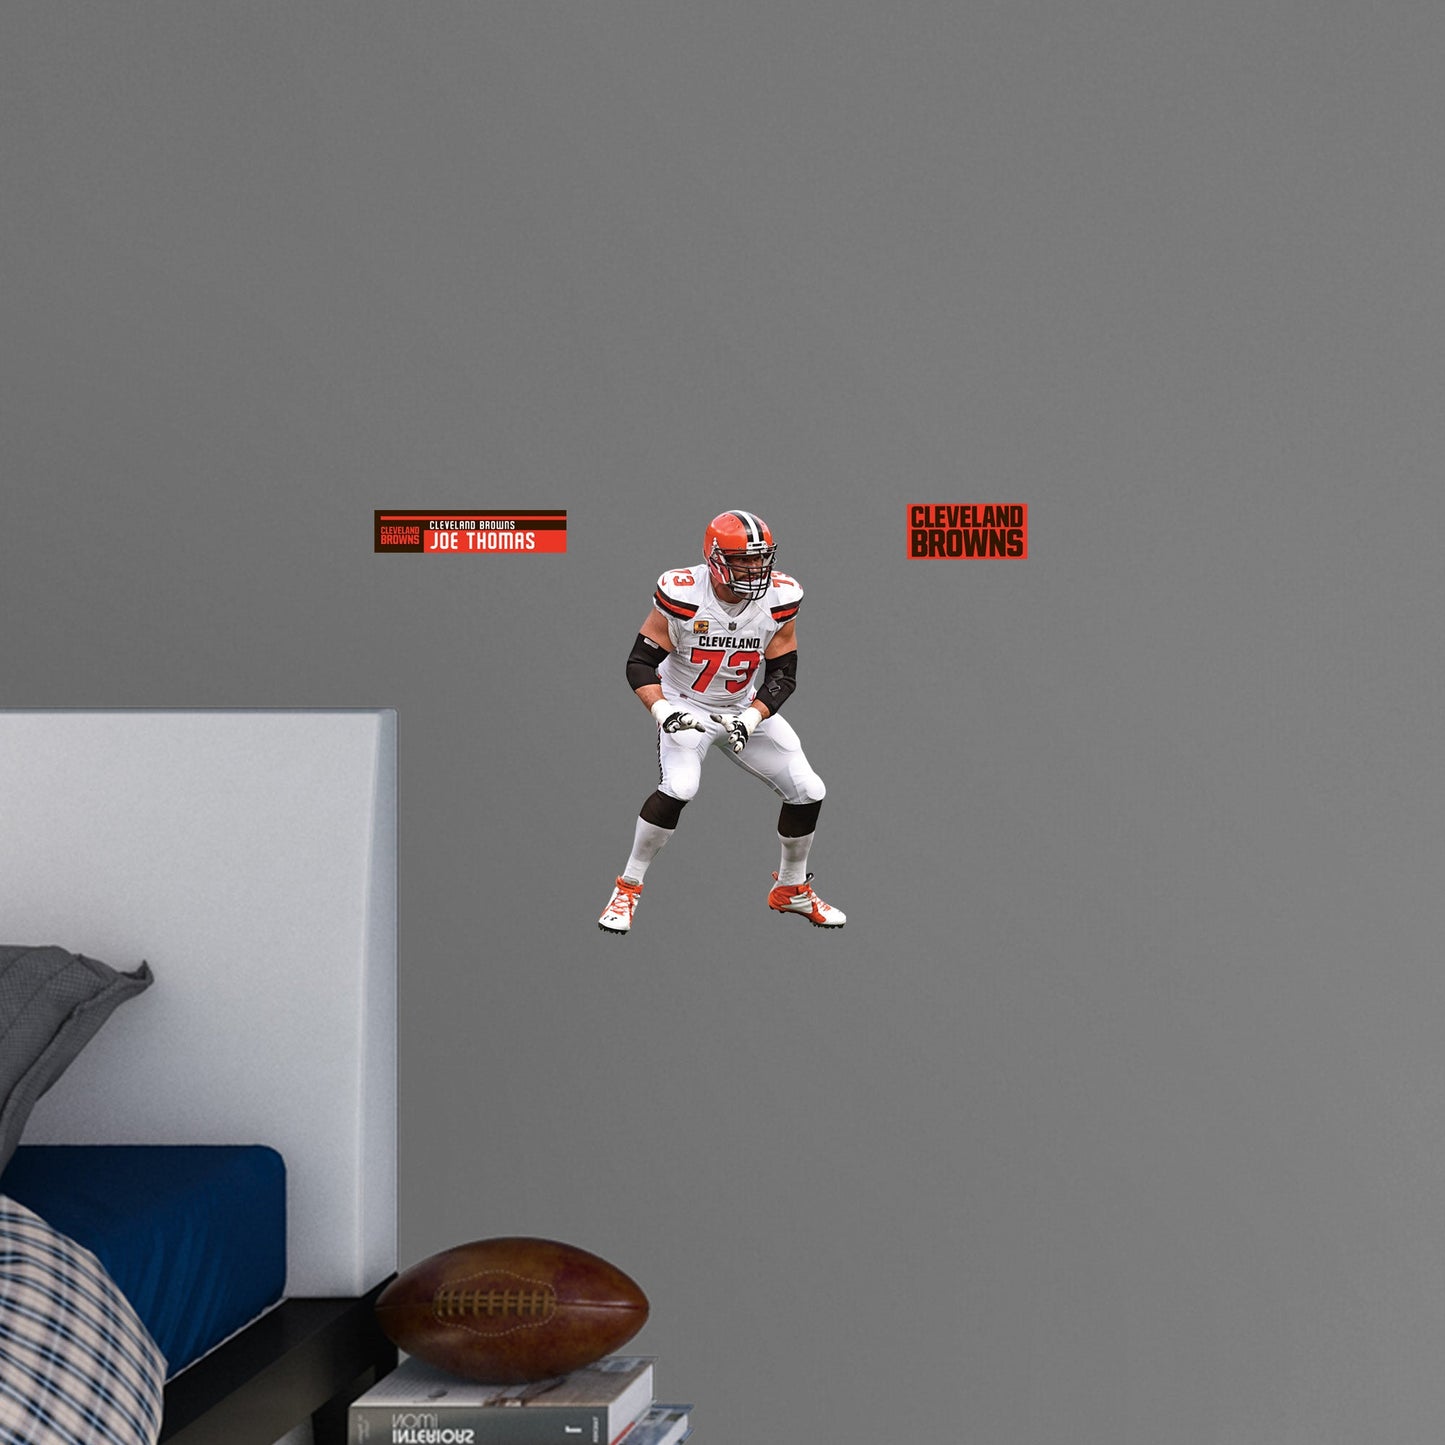 Cleveland Browns: Joe Thomas Legend - Officially Licensed NFL Removable Adhesive Decal